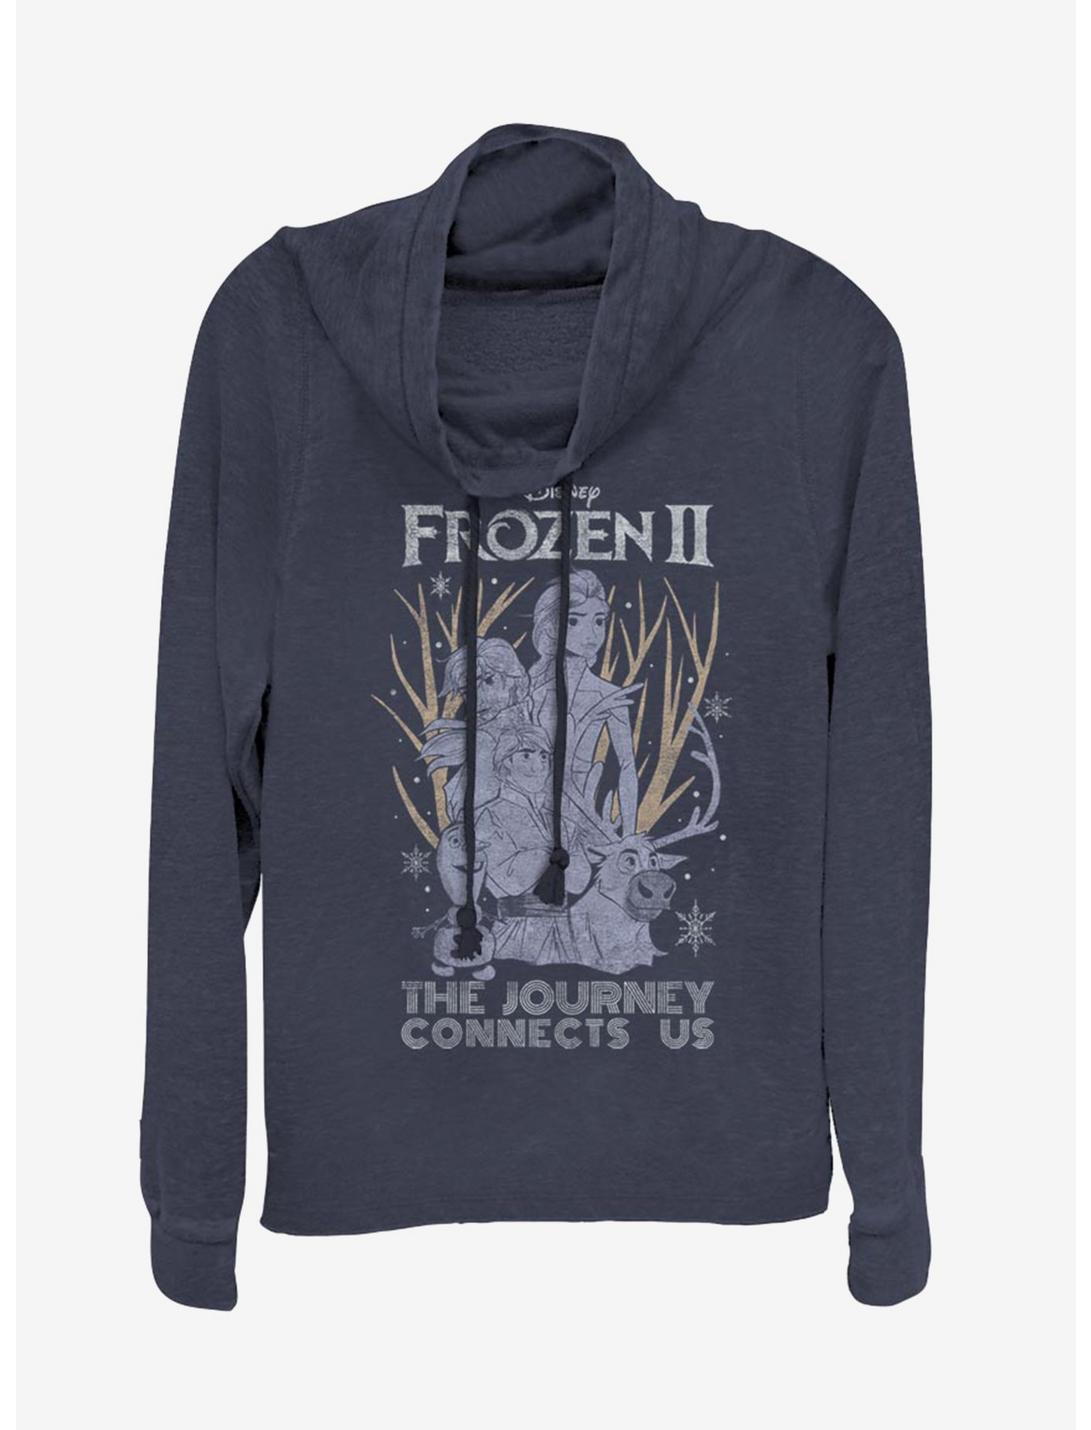 Disney Frozen 2 The Journey Connects Us Cowlneck Long-Sleeve Womens Top, NAVY, hi-res